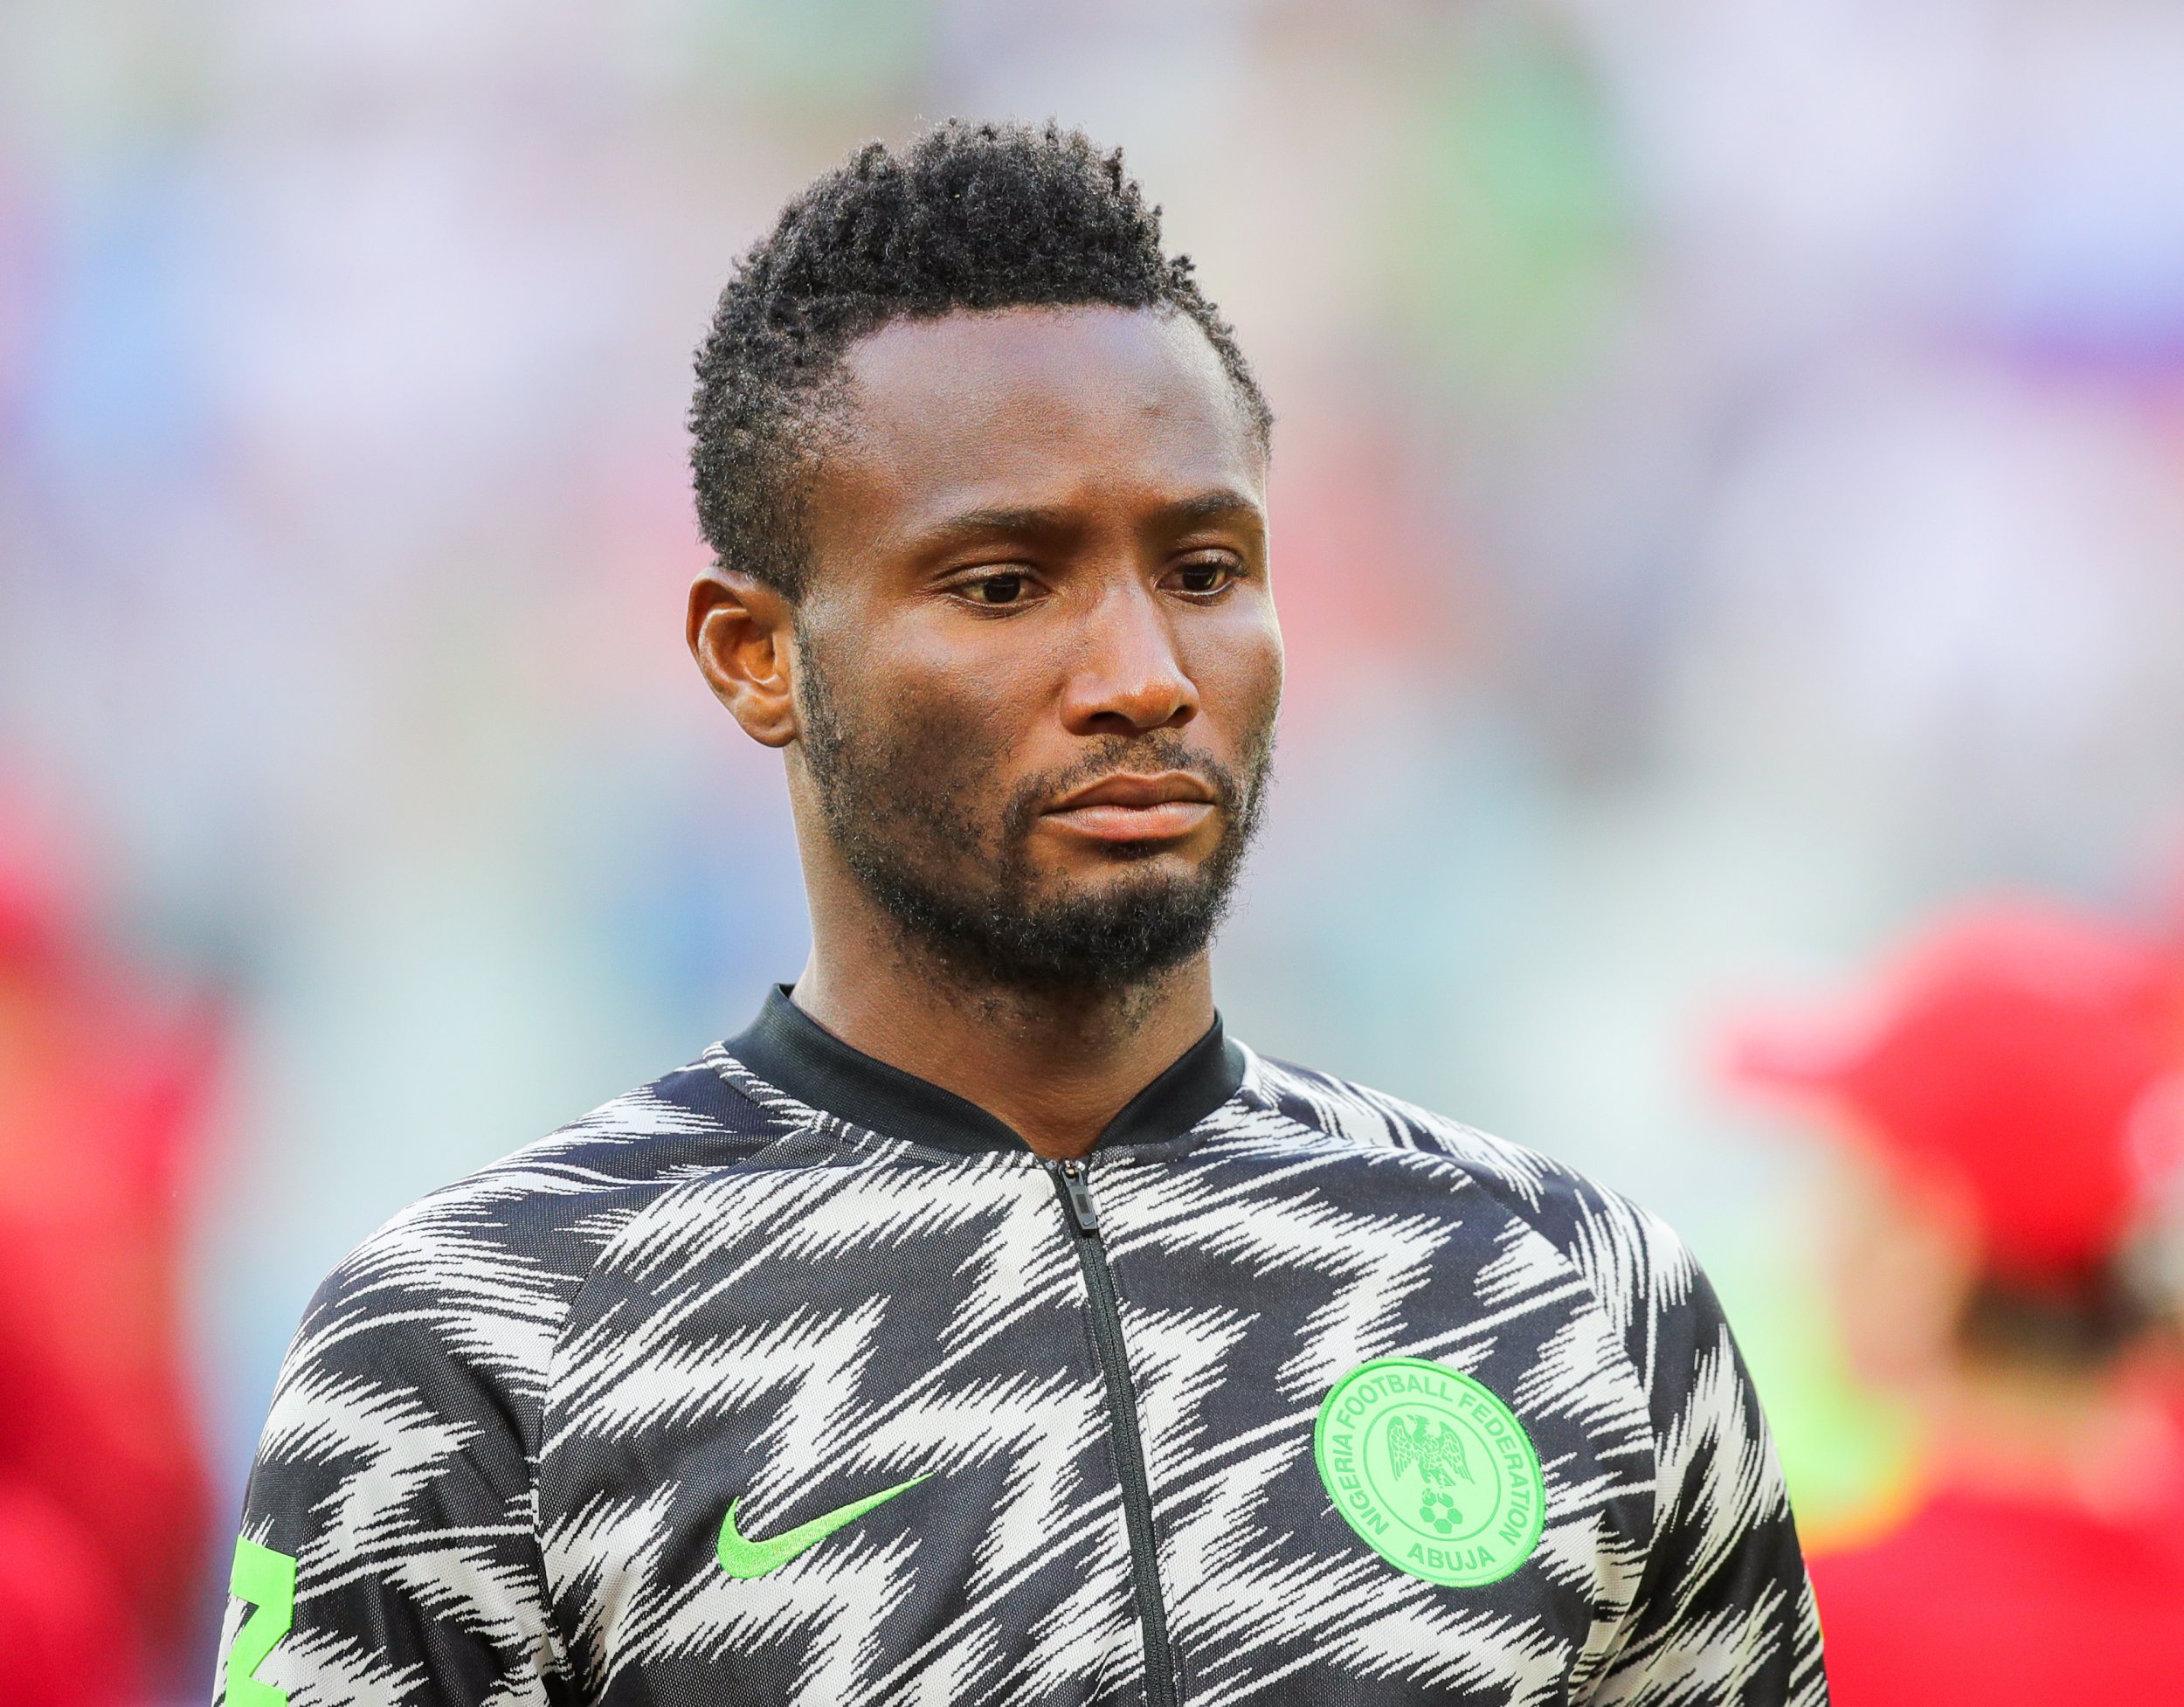 John Obi Mikel told father had been kidnapped four hours before Nigeria's World Cup game